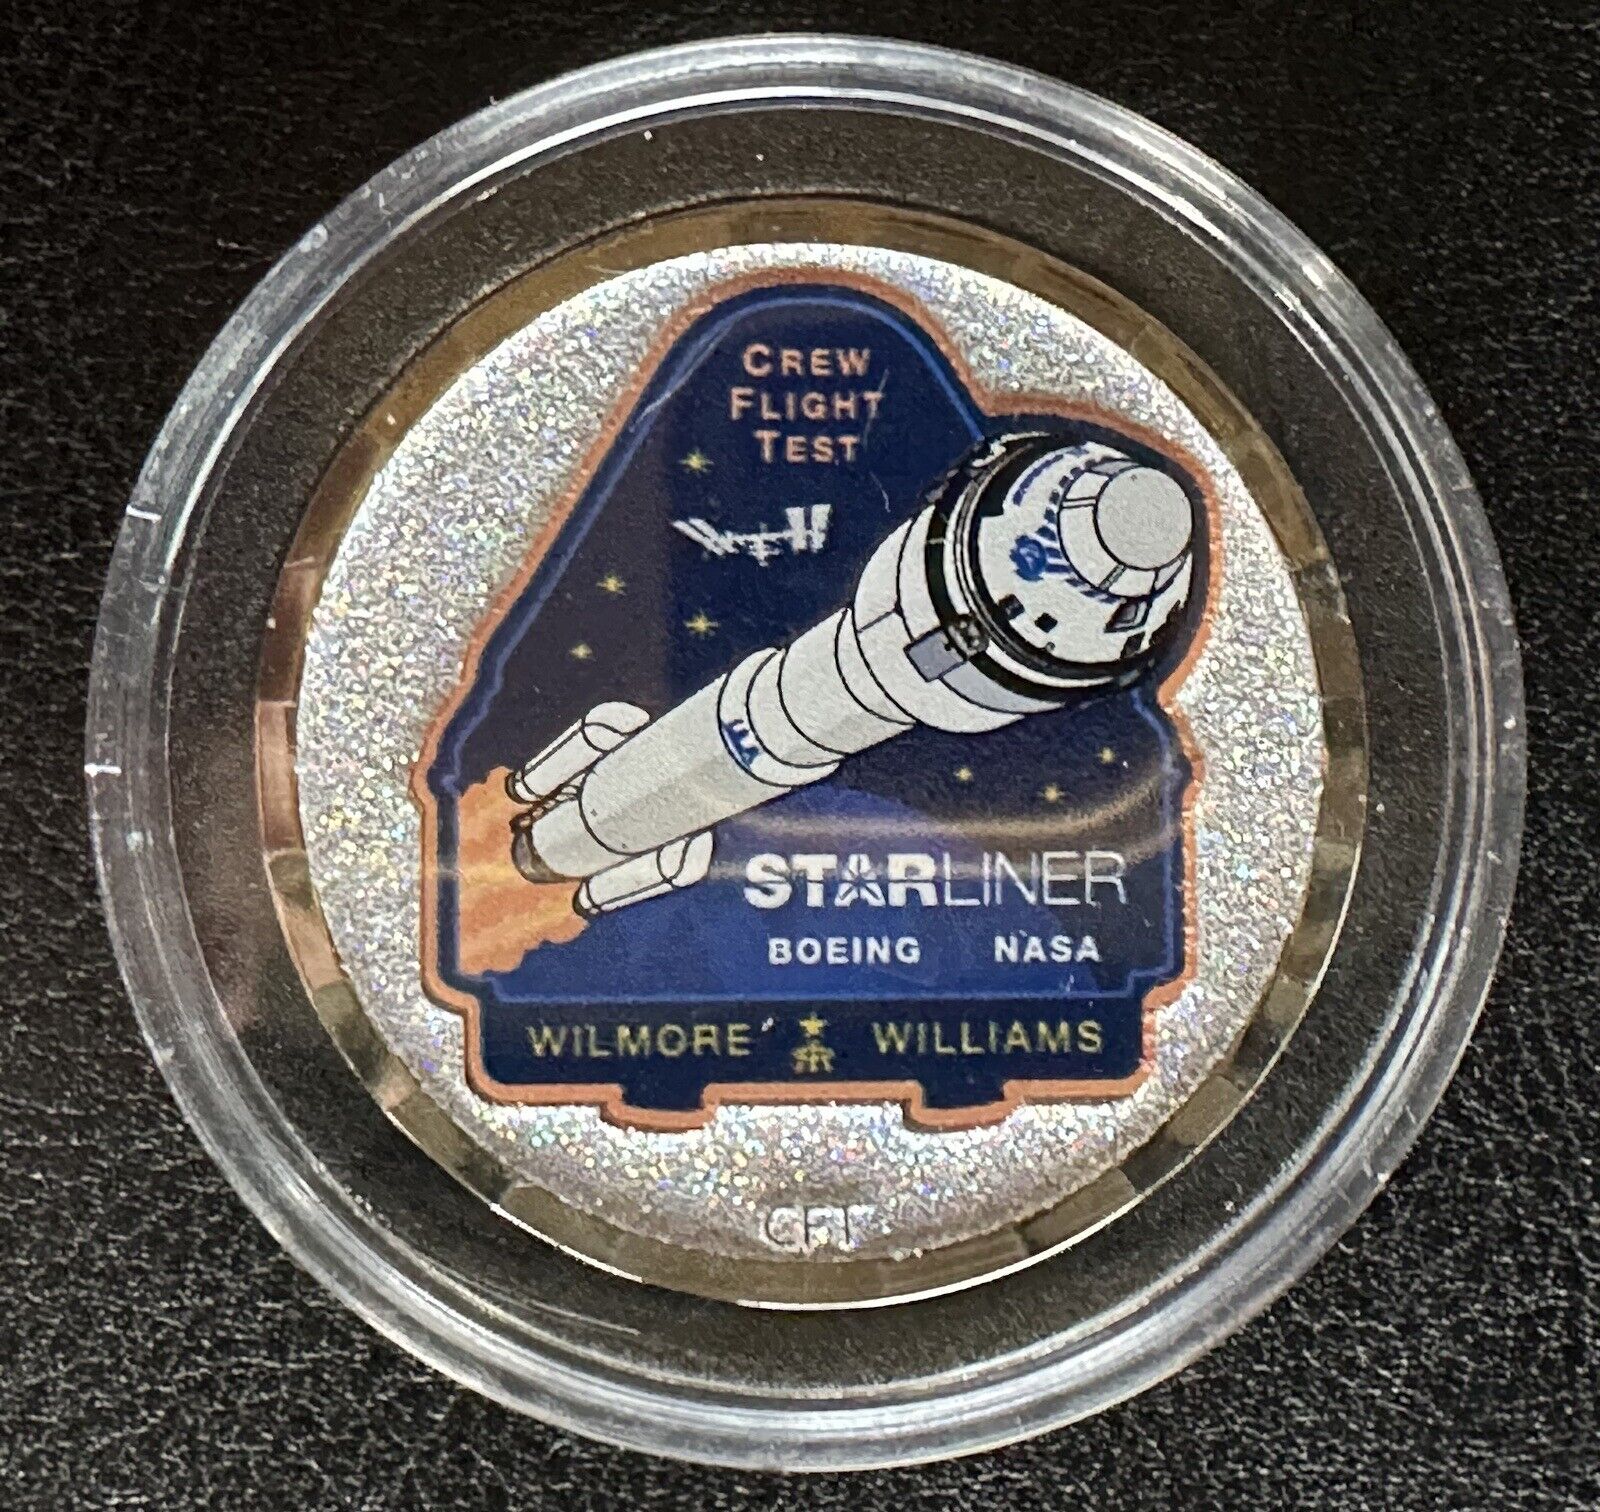 NEW NASA Boeing Starliner CFT “Special Edition” COIN Crew Flight Test KSC +Gift